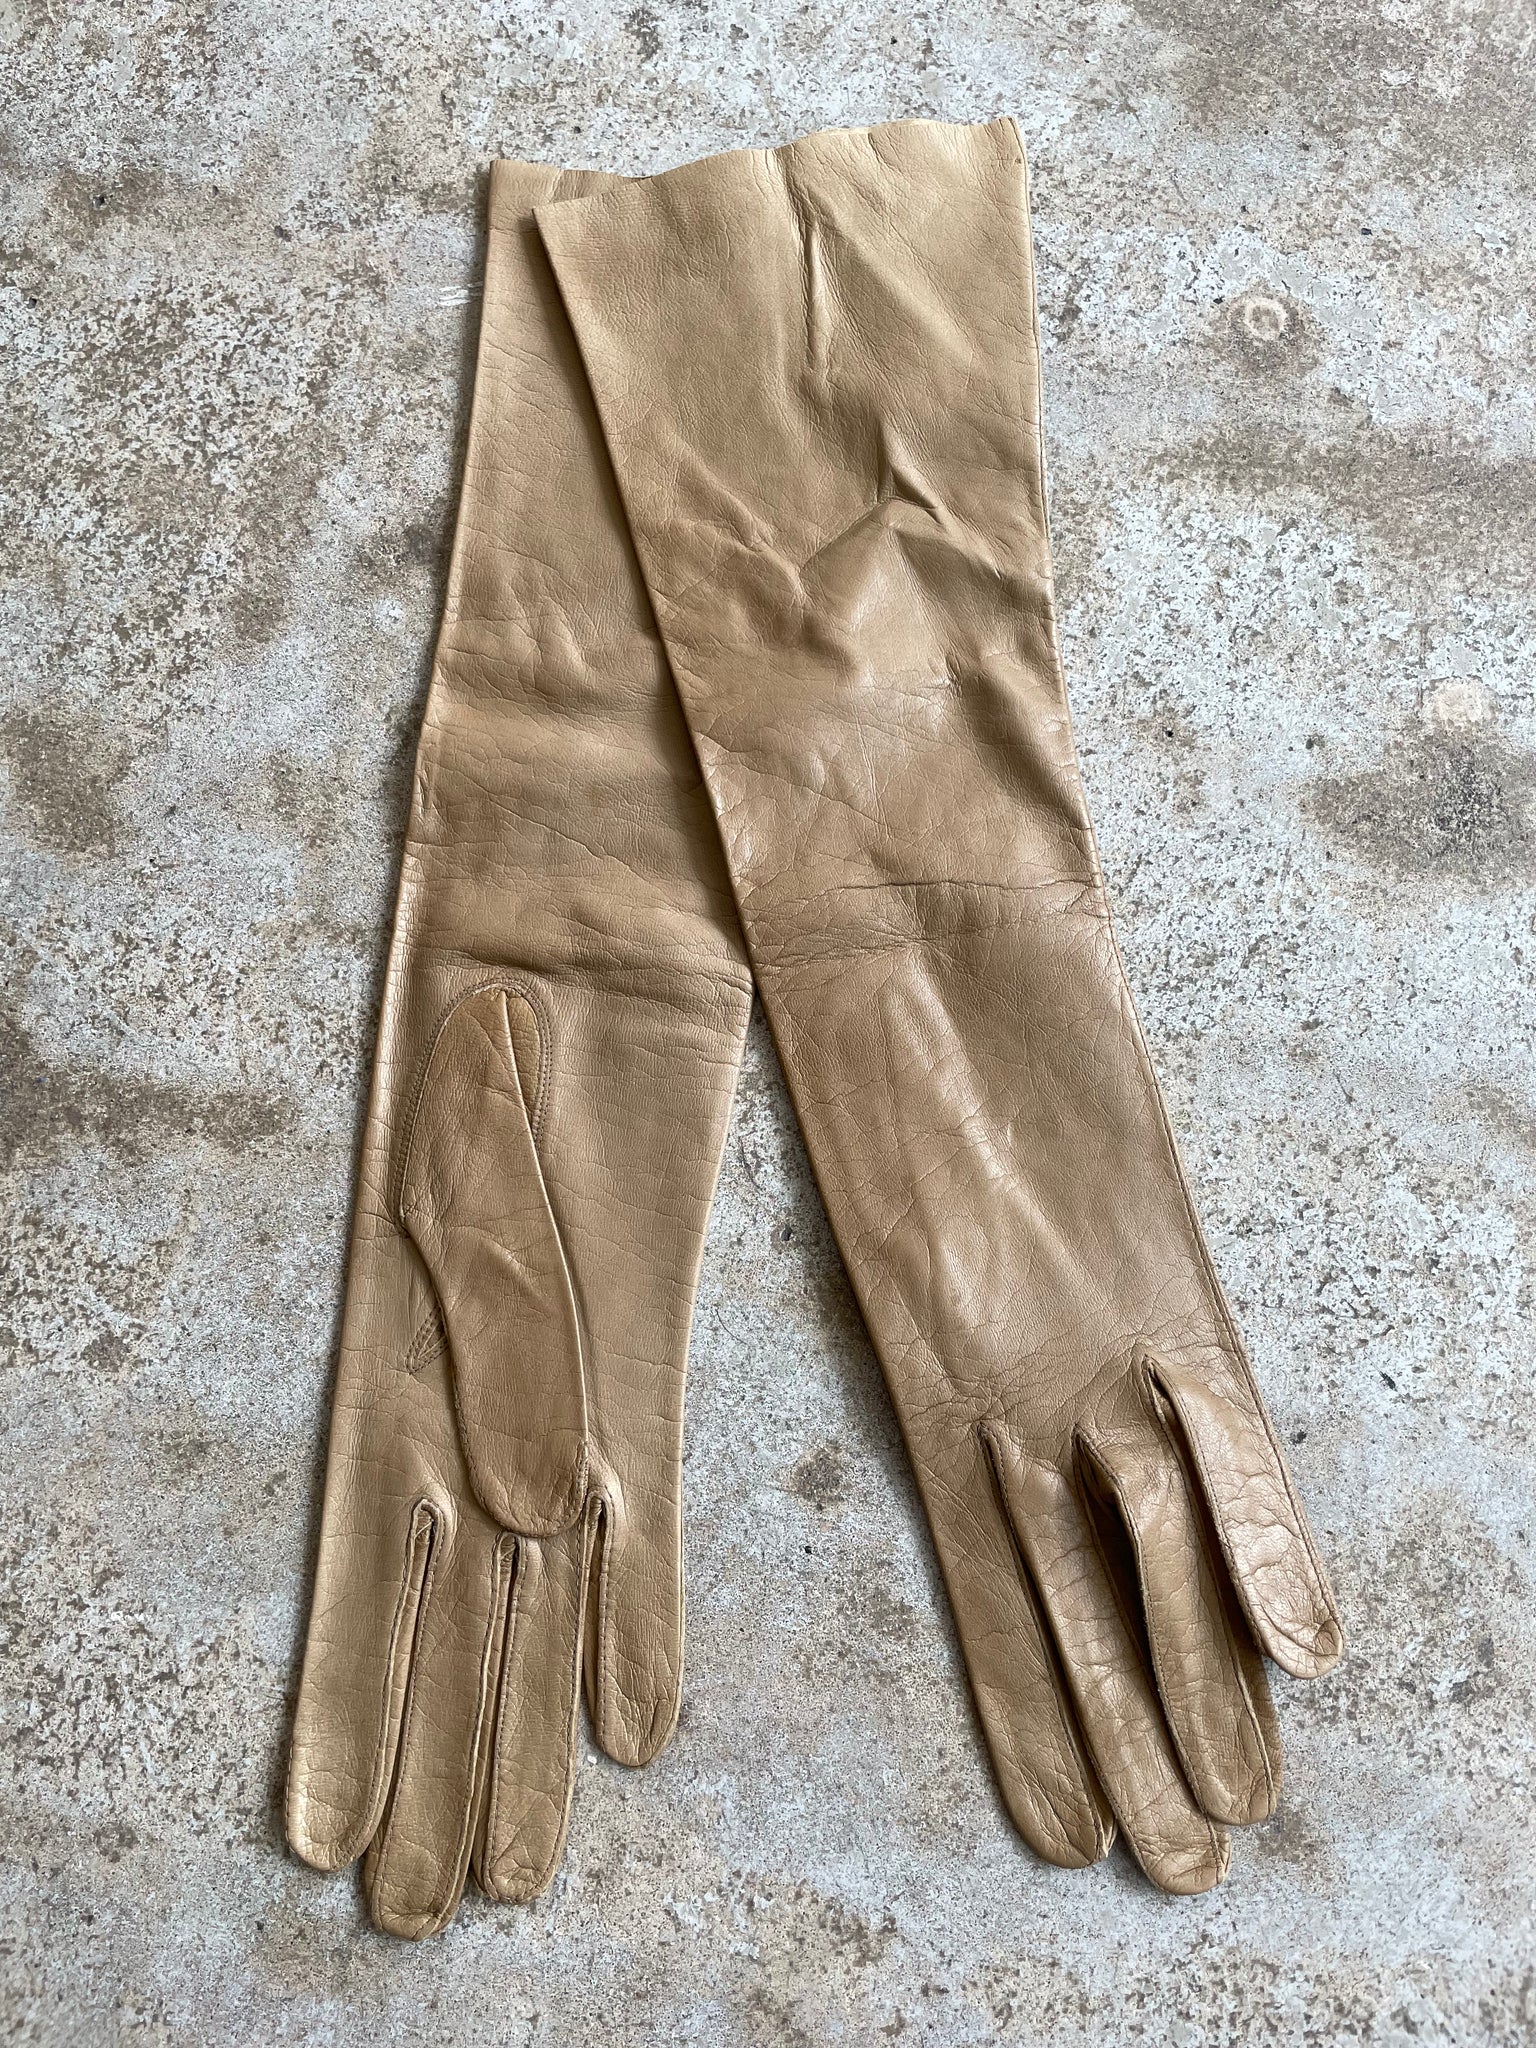 Beige Leather Gloves 6.5